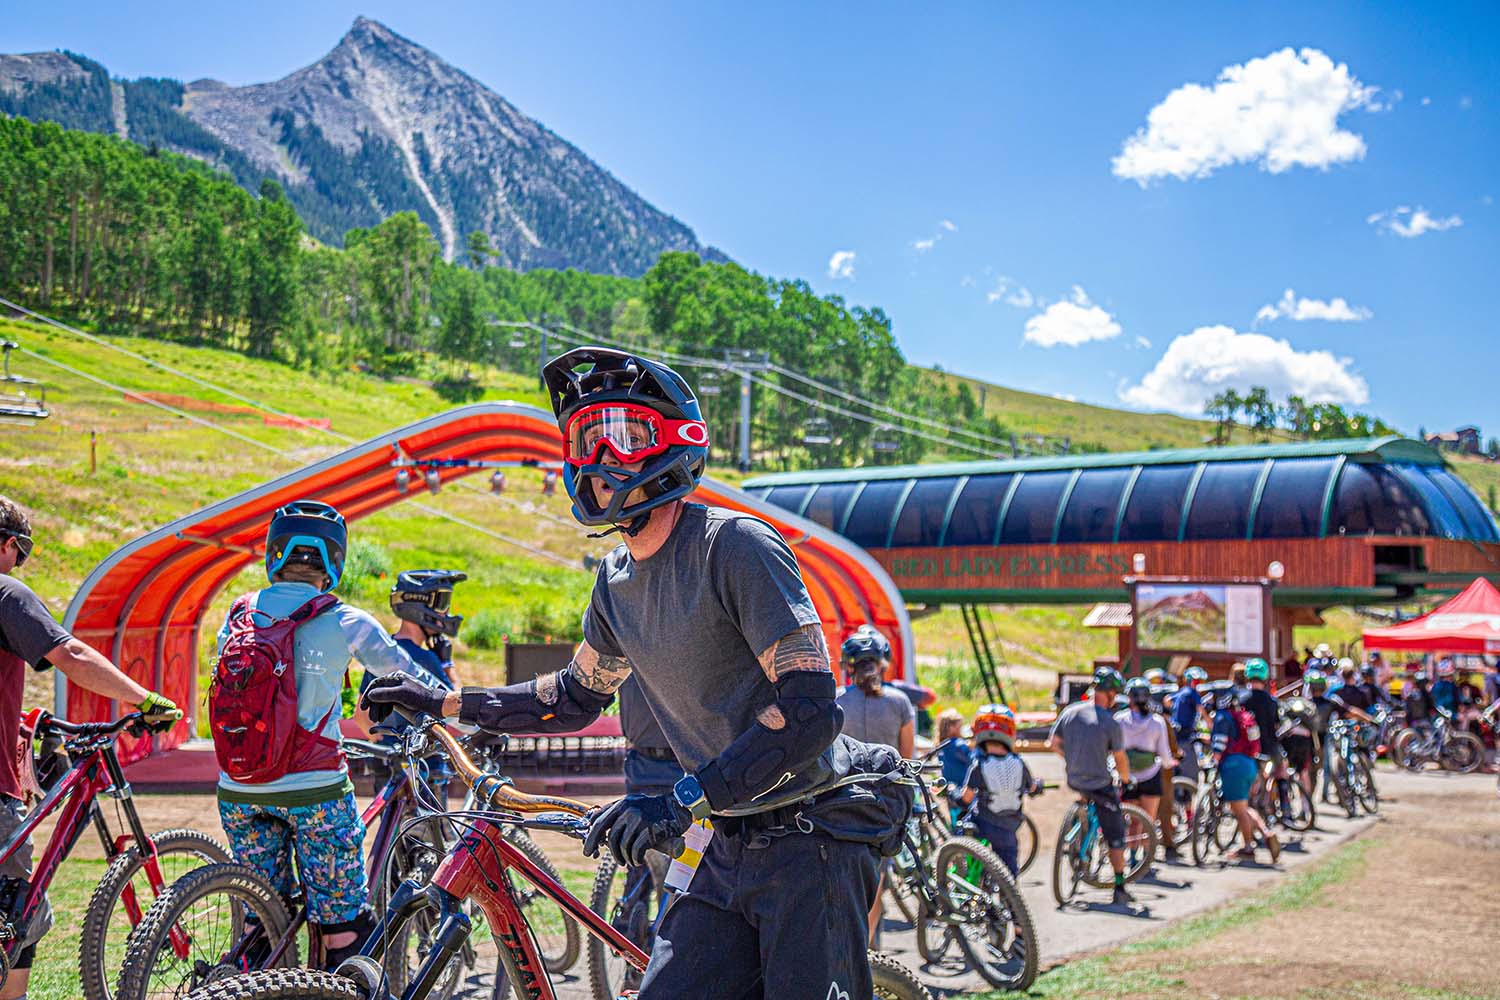 Outerbike Crested Butte - Photo: Will Taylor